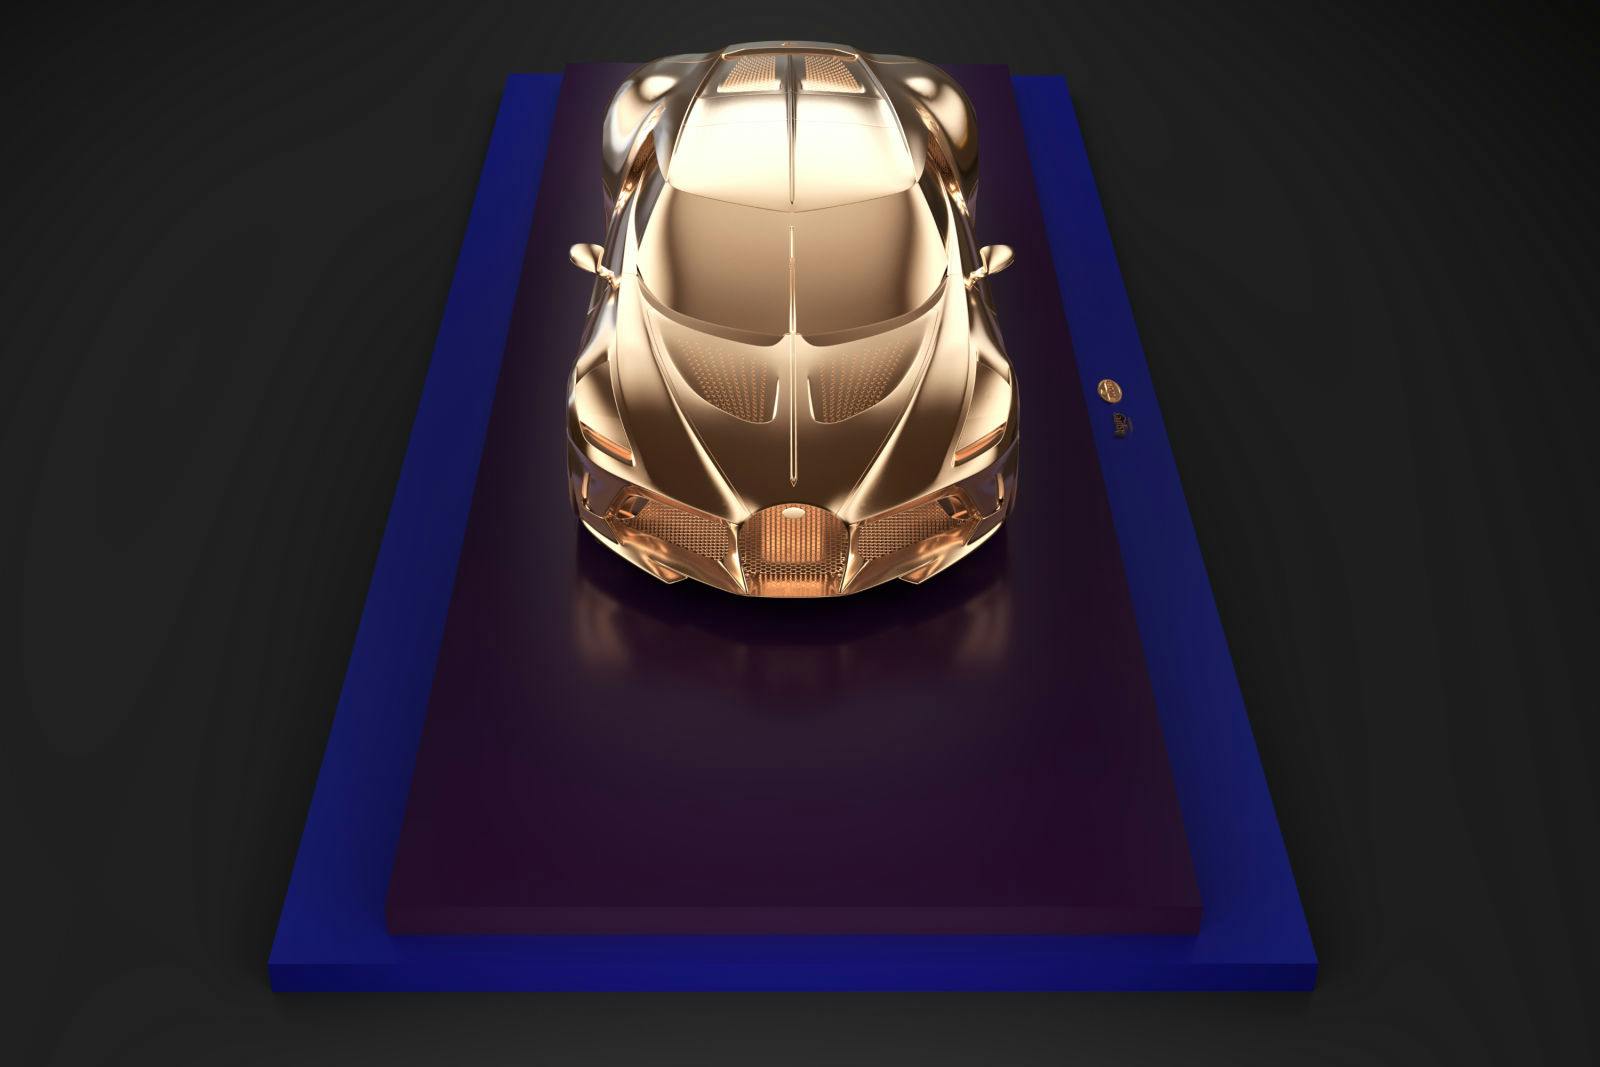 Inspired by the Bugatti “La Voiture Noire”, Asprey’s studio created a unique gold sculpture and original artwork fused with an NFT.
